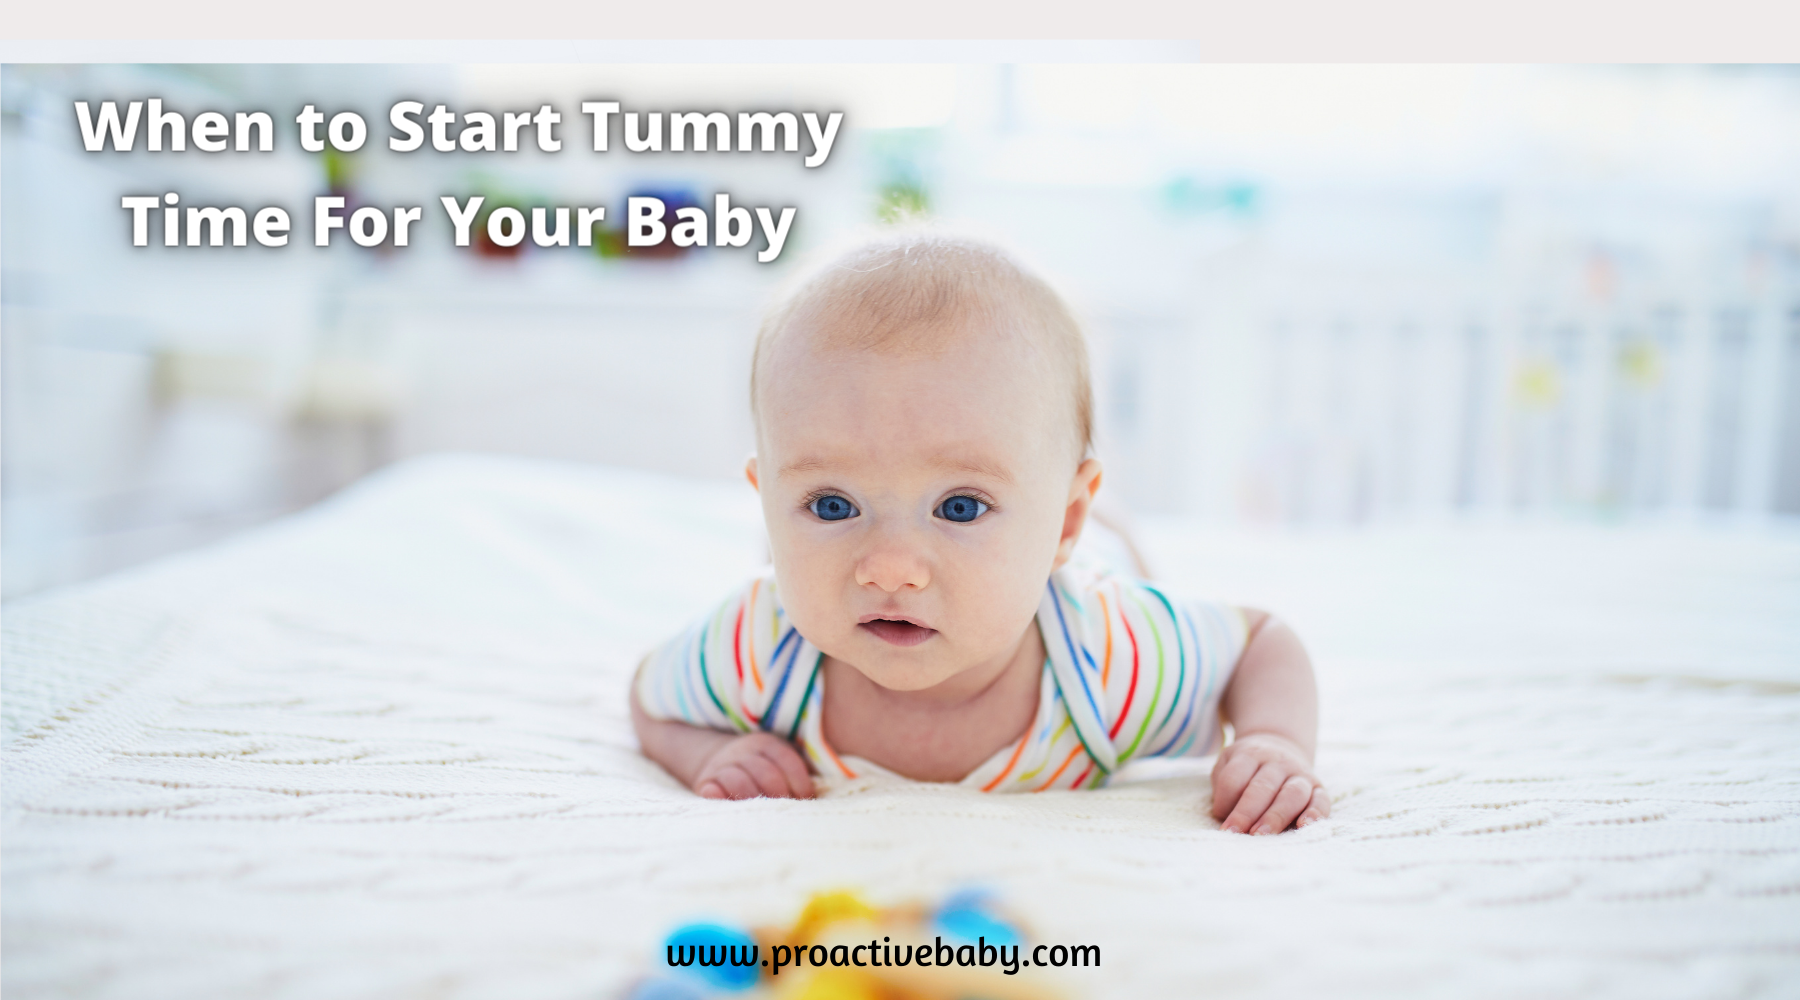 When to Start Tummy Time For Your Baby